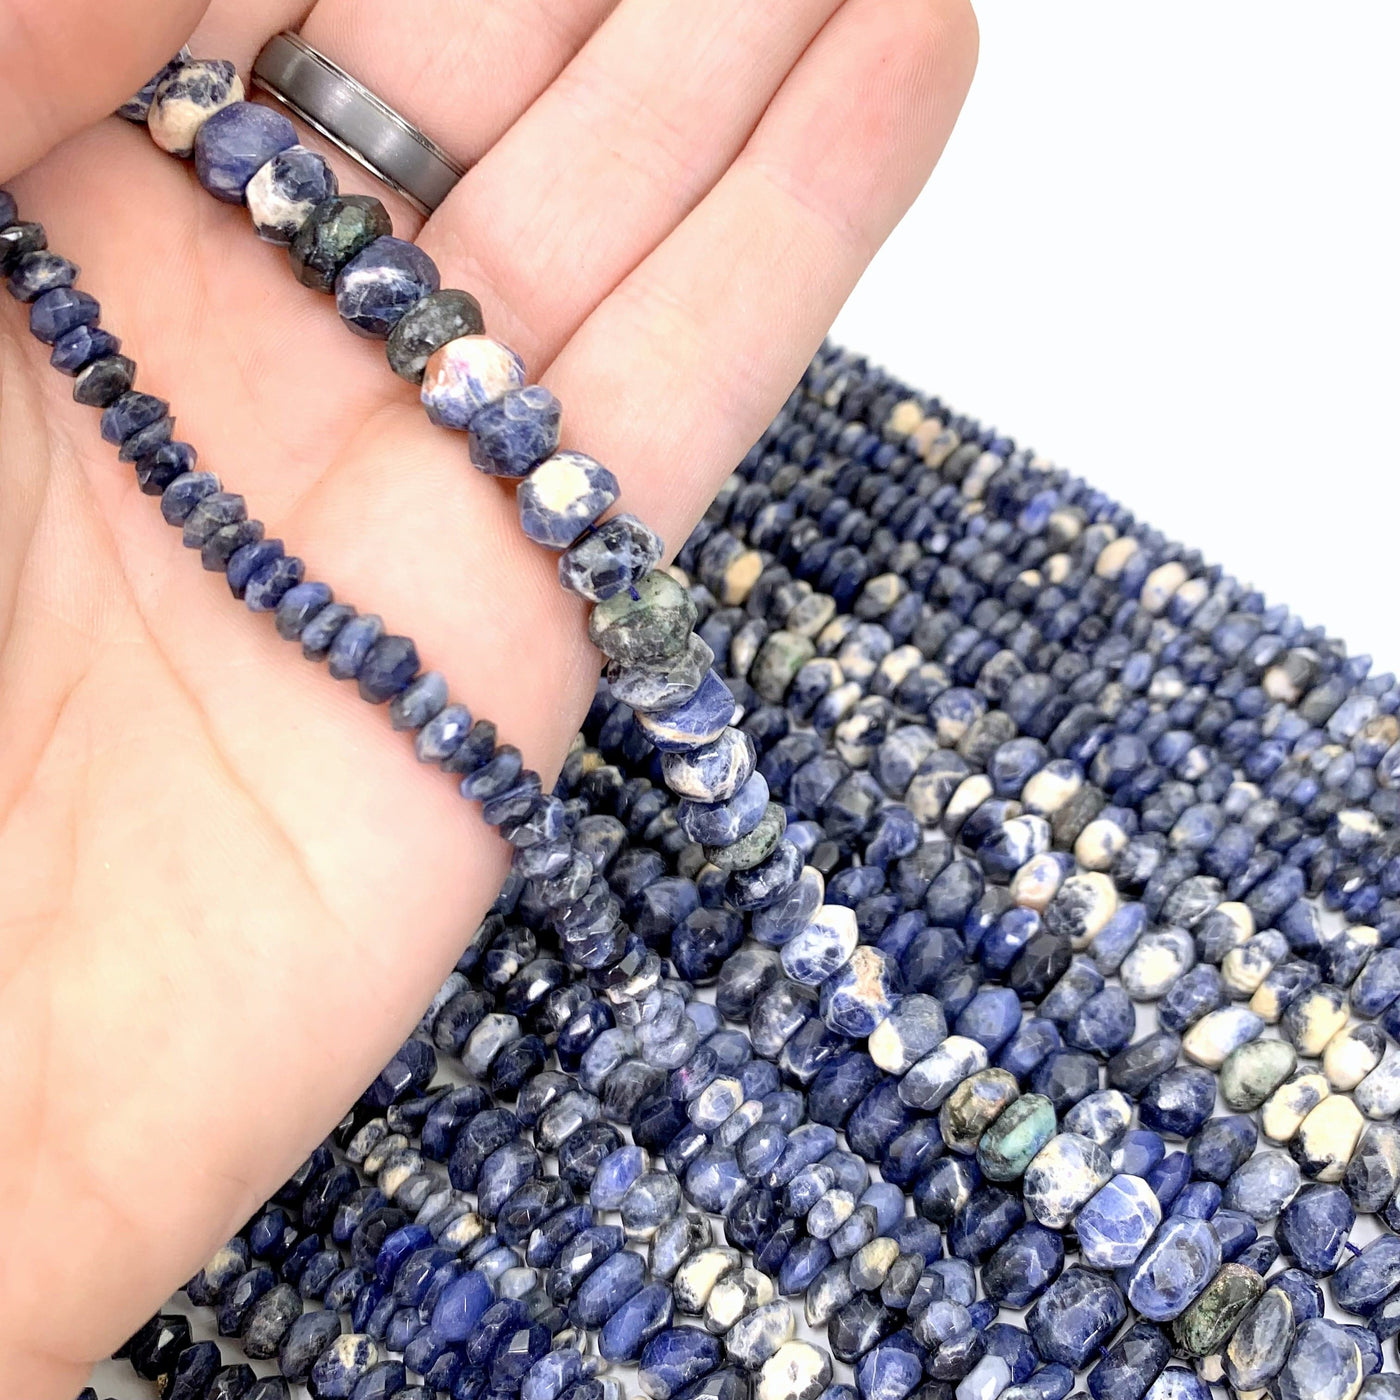 both sodalite variations ( small left, large right) in hand with more sodalite beads in the background on a white background